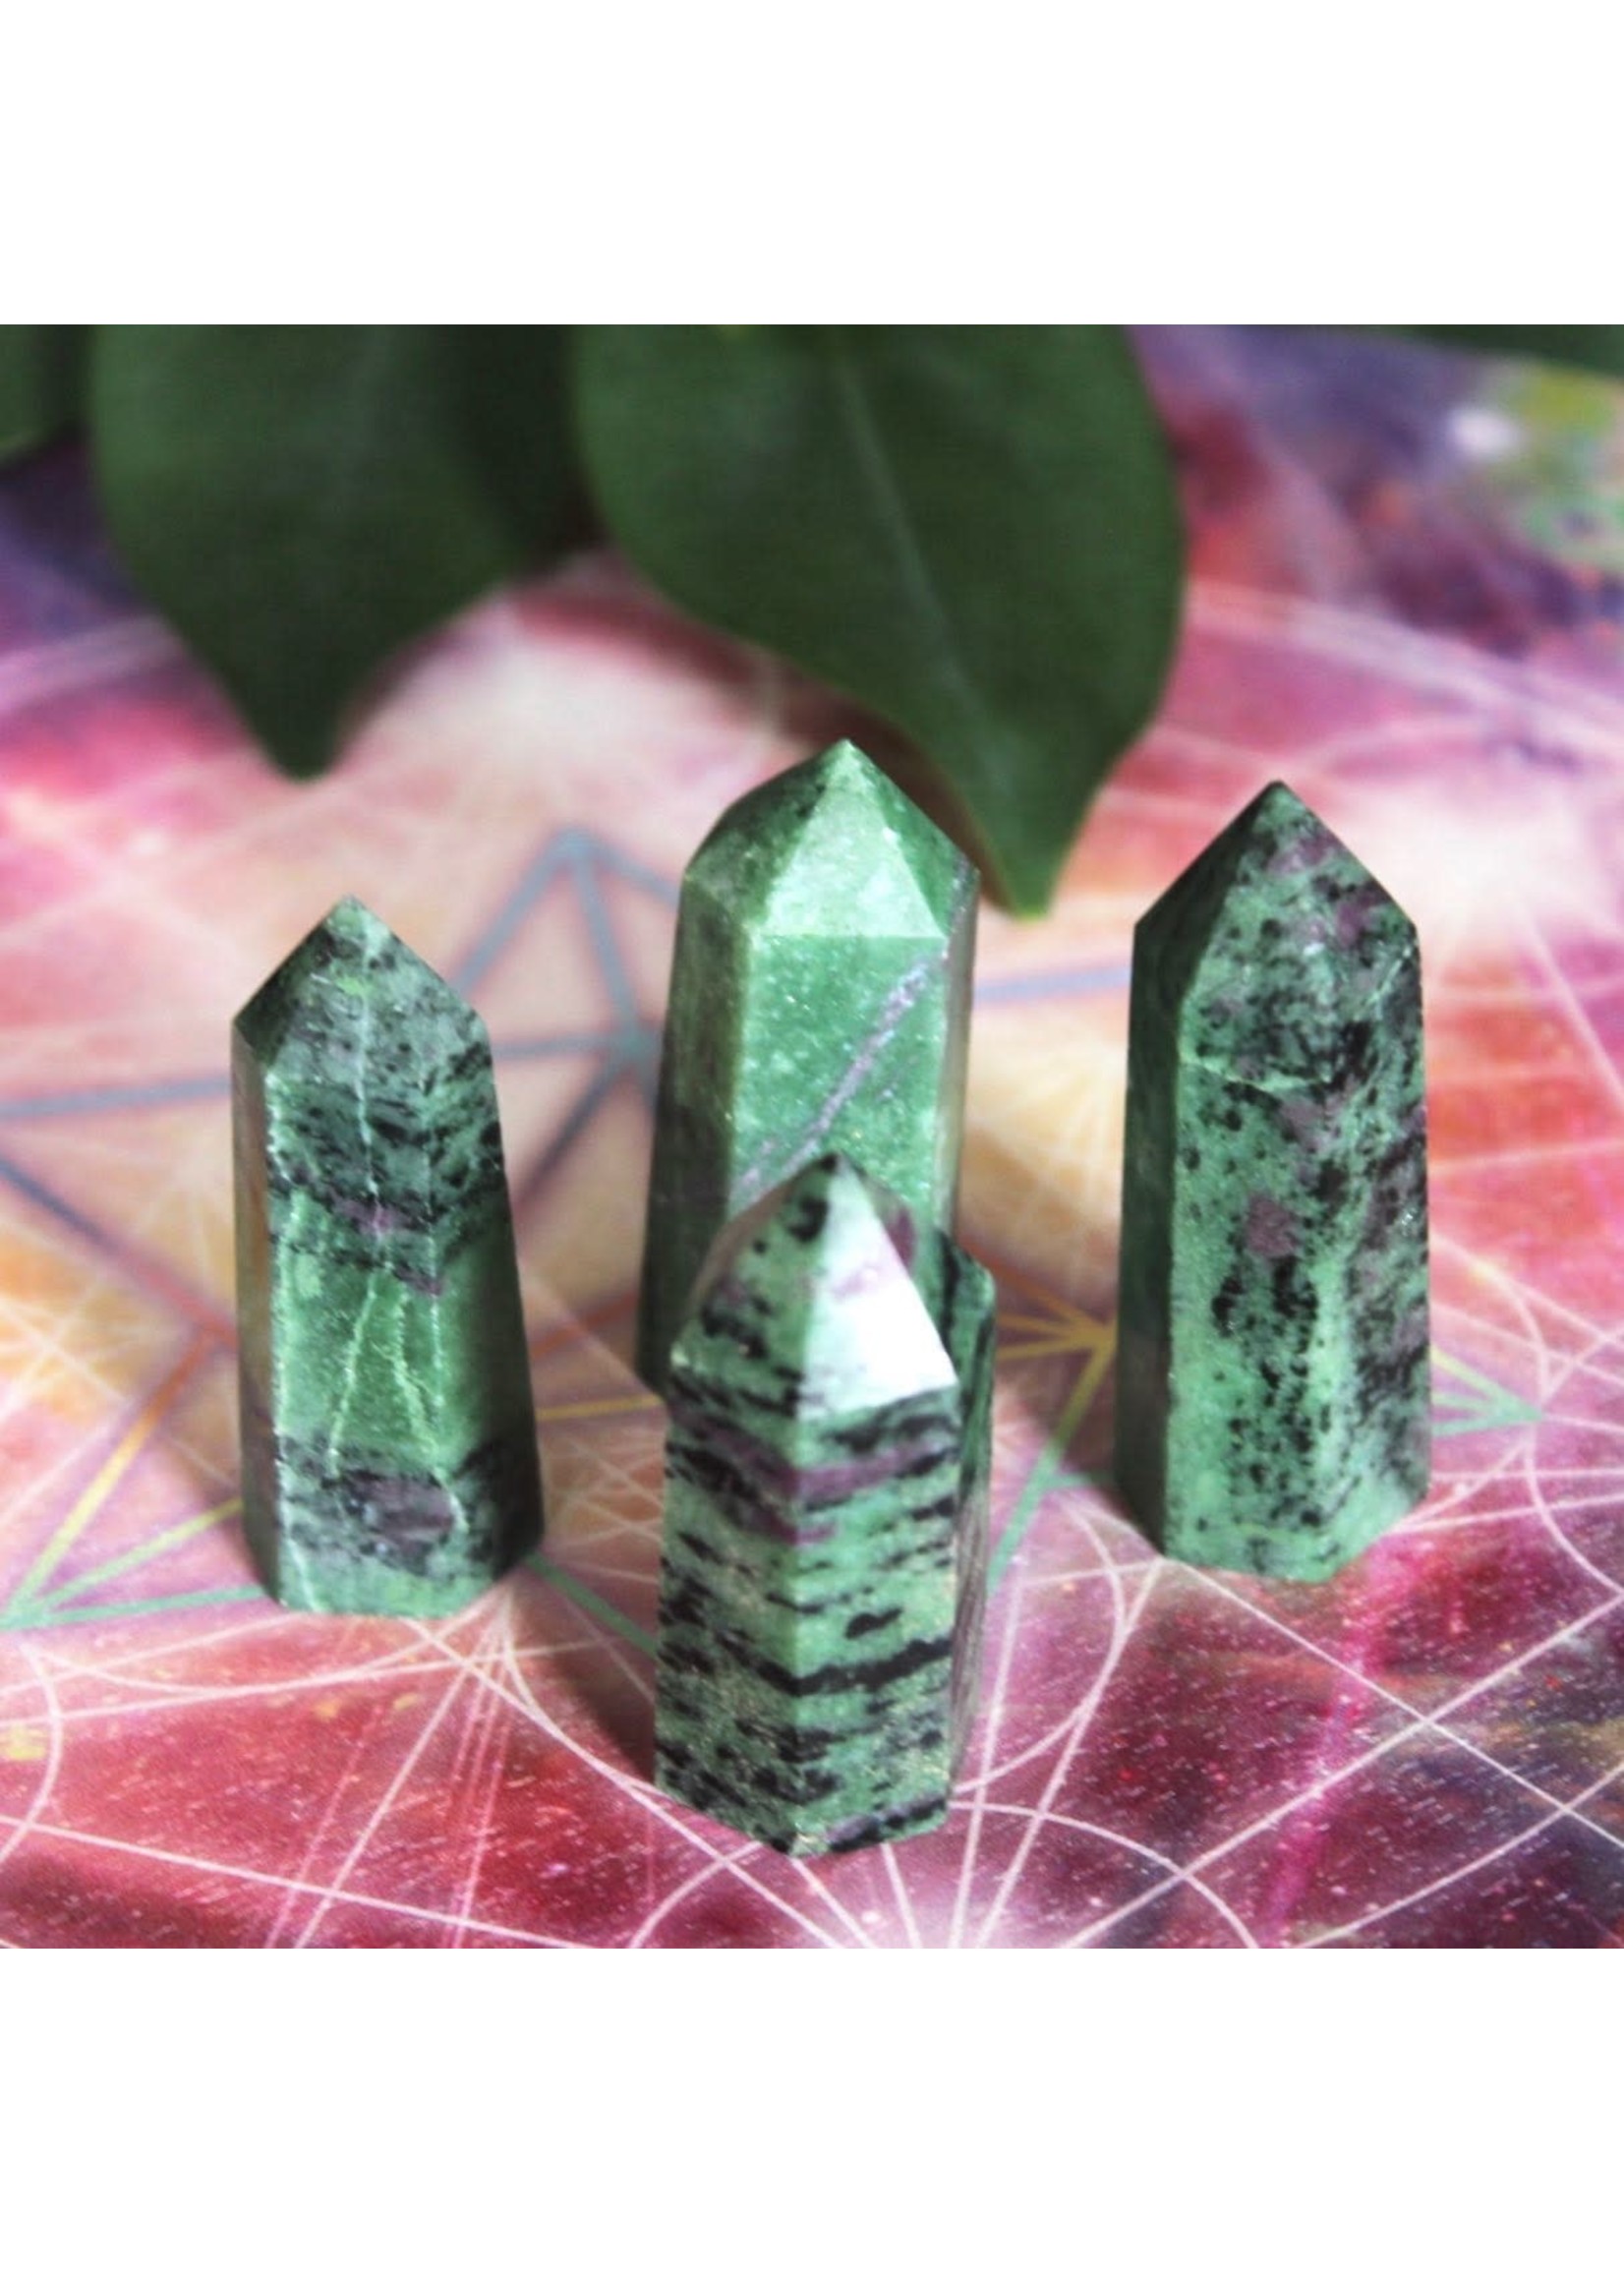 Ruby Zoisite Generators for connection and passion